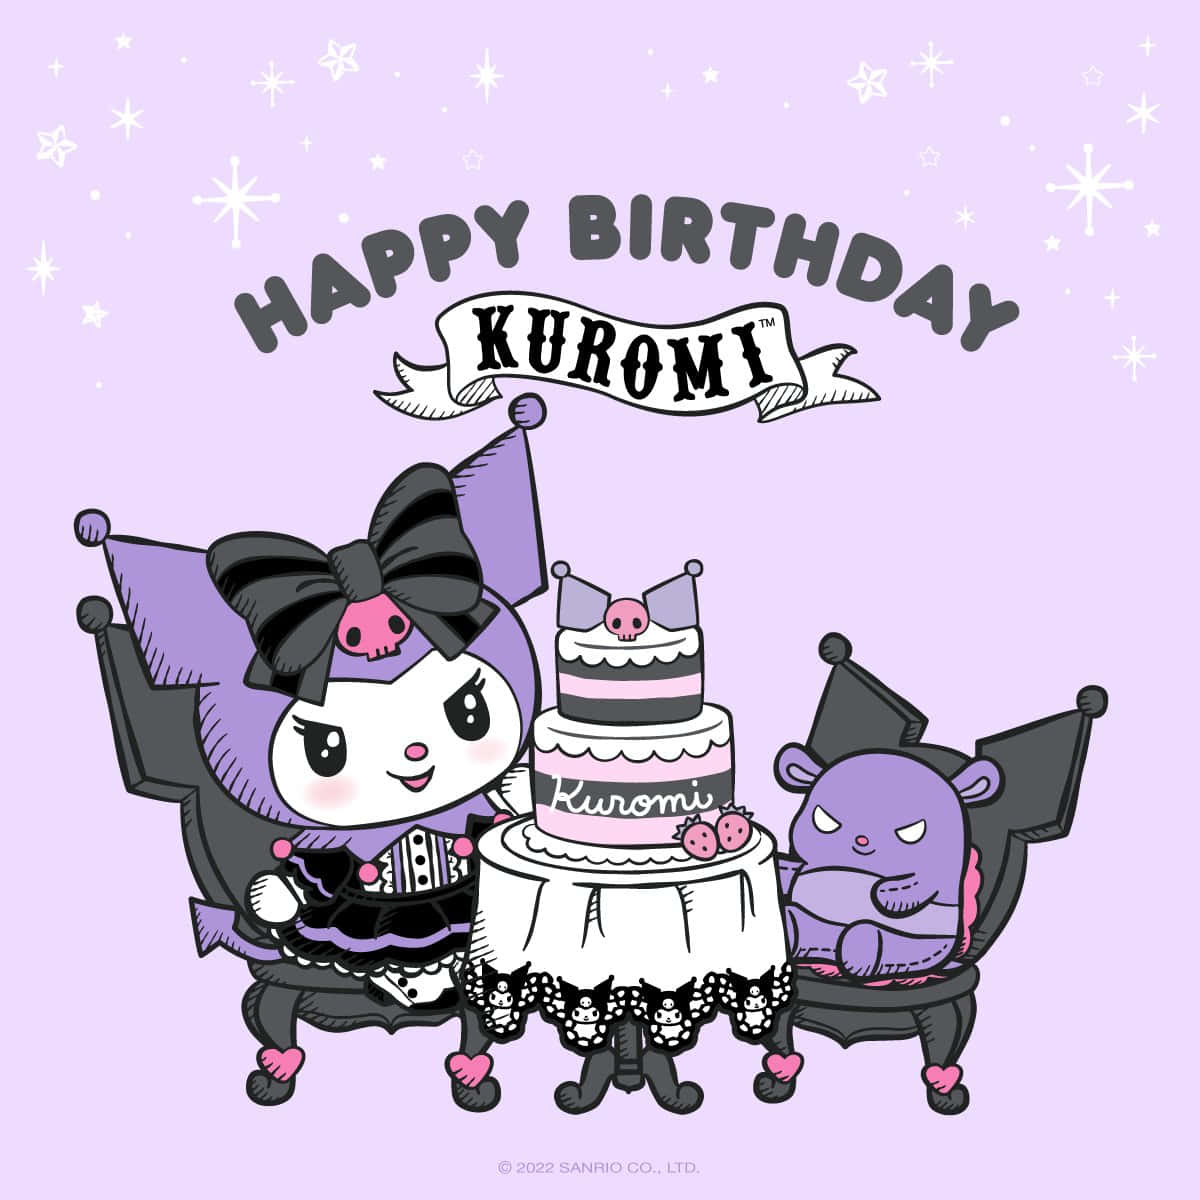 Celebrate Kuromi's Birthday with this adorable wallpaper! Wallpaper